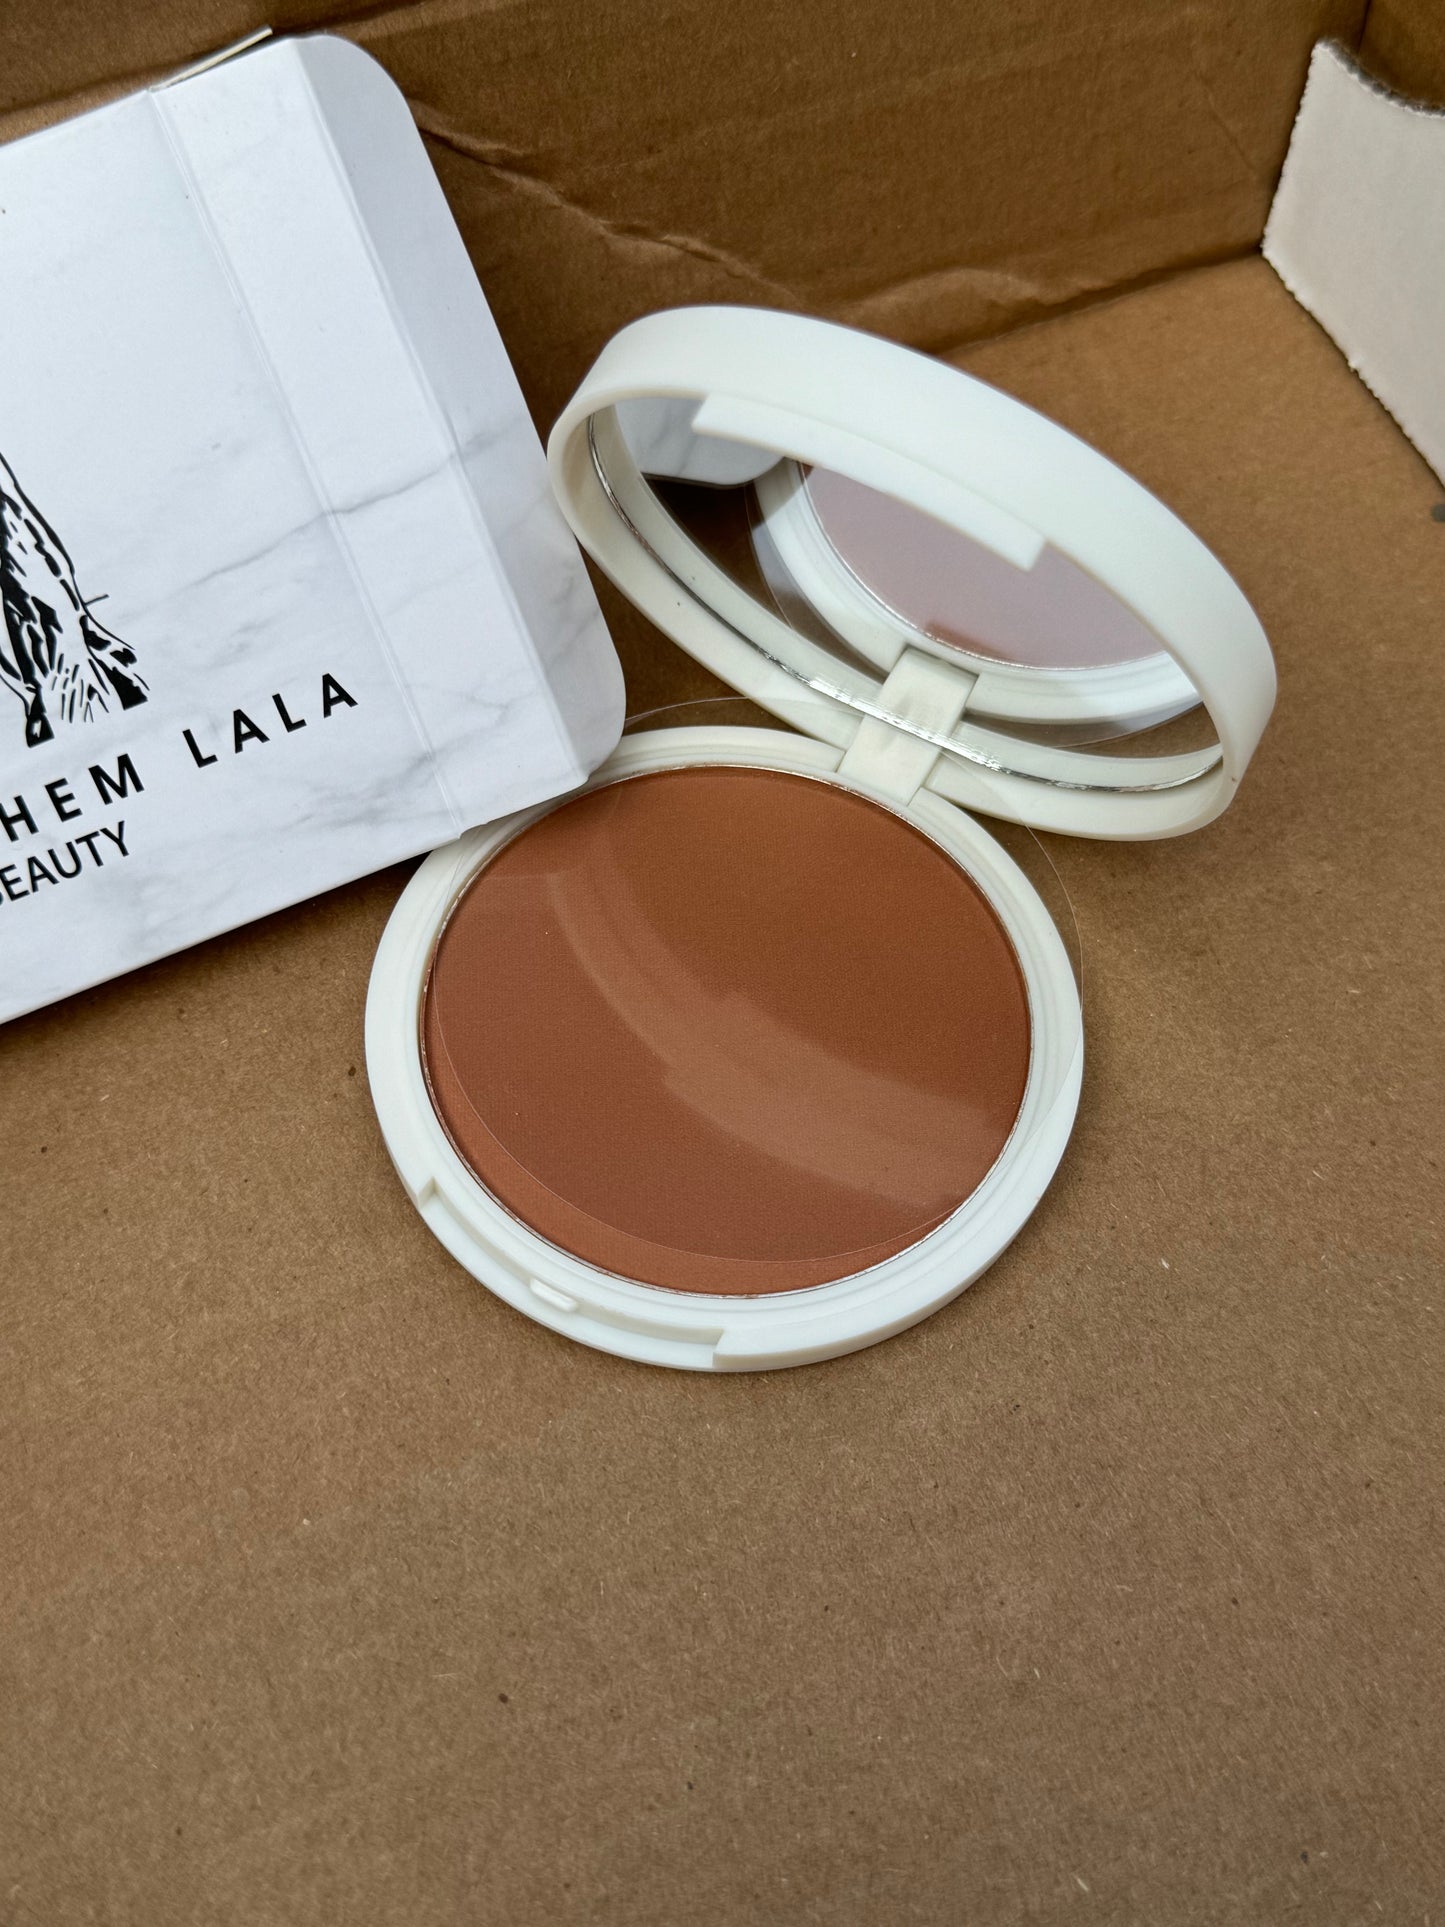 #Givethemlala MUST-HAVE BRONZER in Barbados